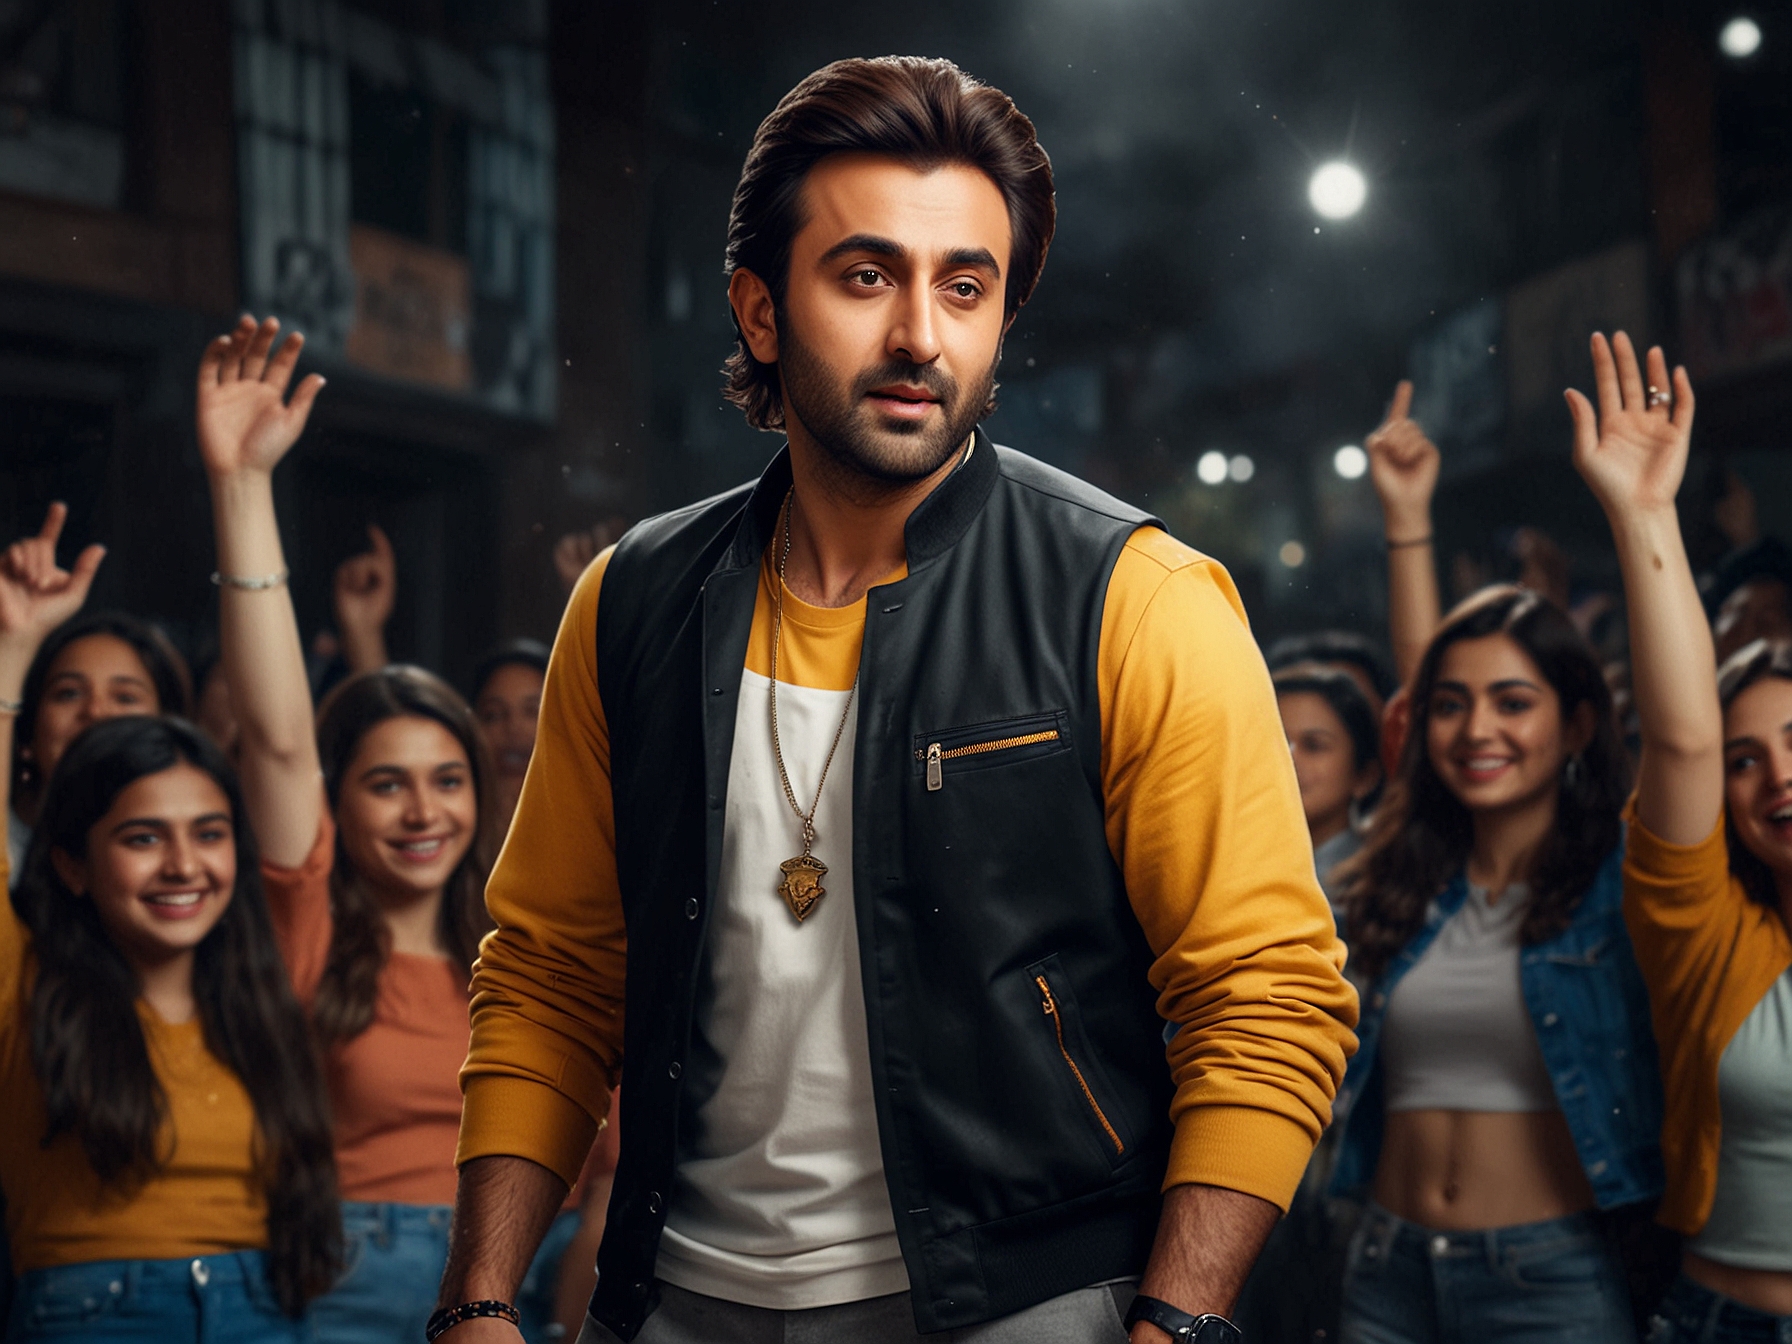 Fans reminisce about 'Rockstar' in a social media frenzy after an unseen photo from an ad shoot surfaces, highlighting Ranbir Kapoor's transformative portrayal of Janardhan Jakhar.